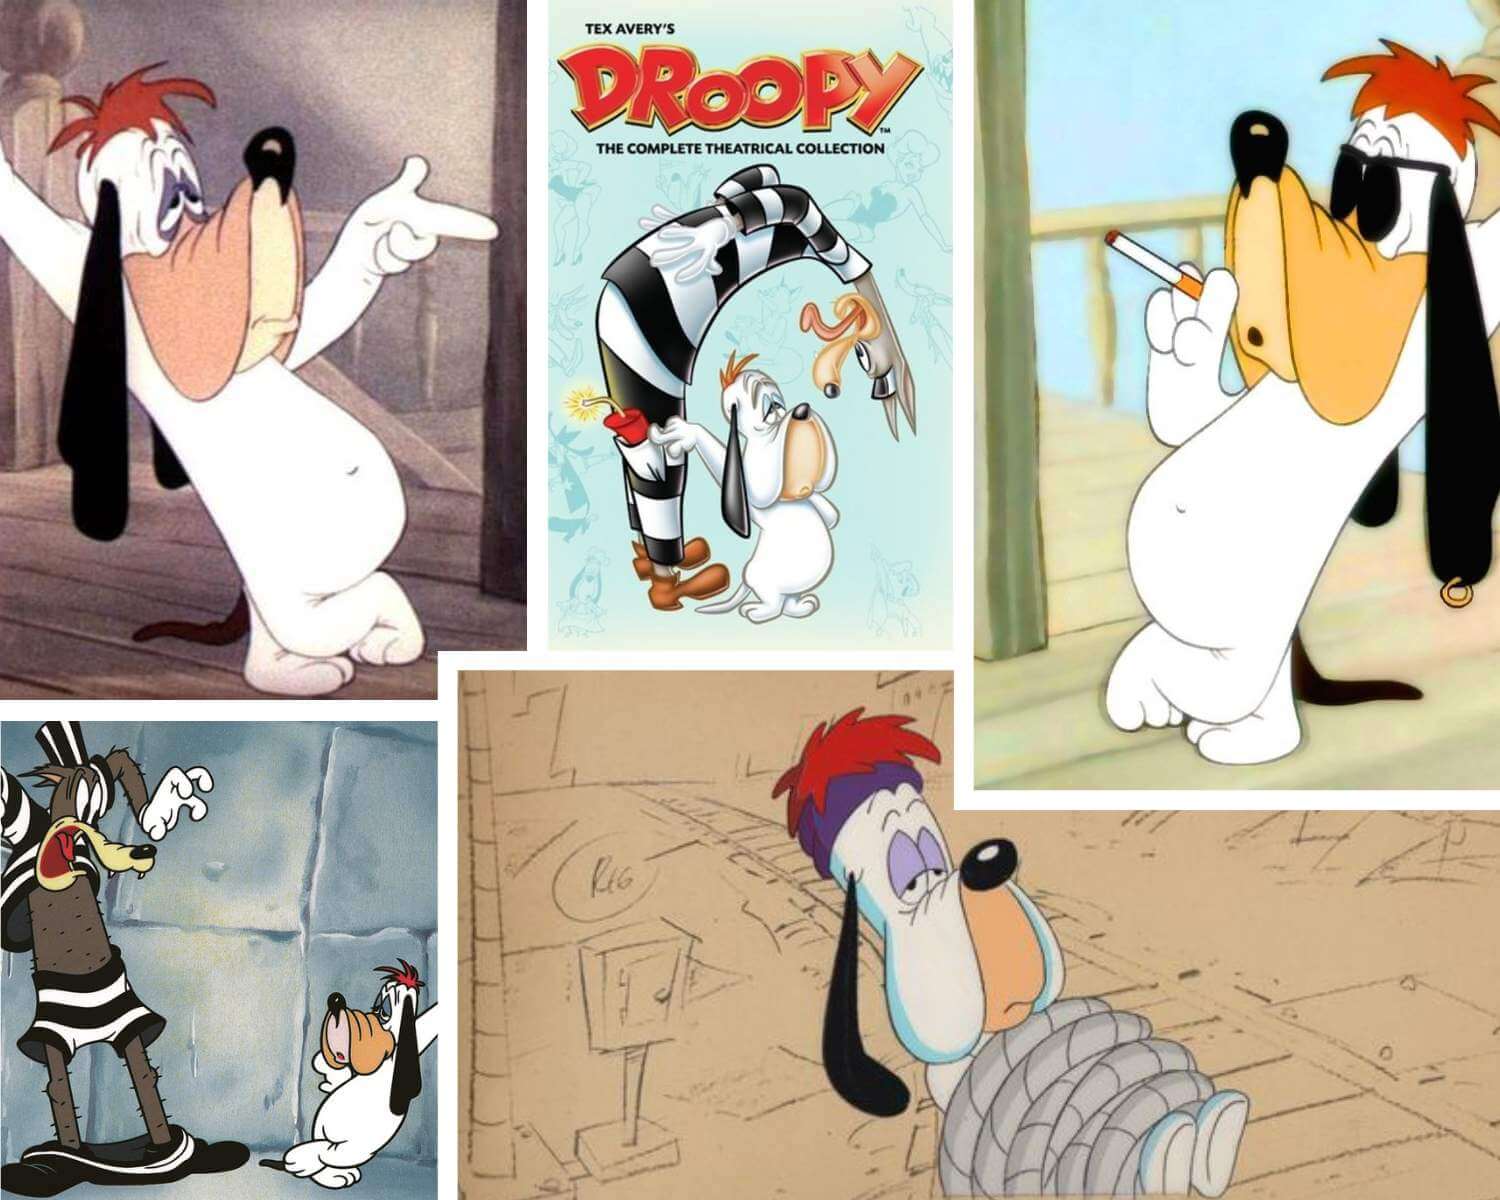 A Tribute to Droopy Dog